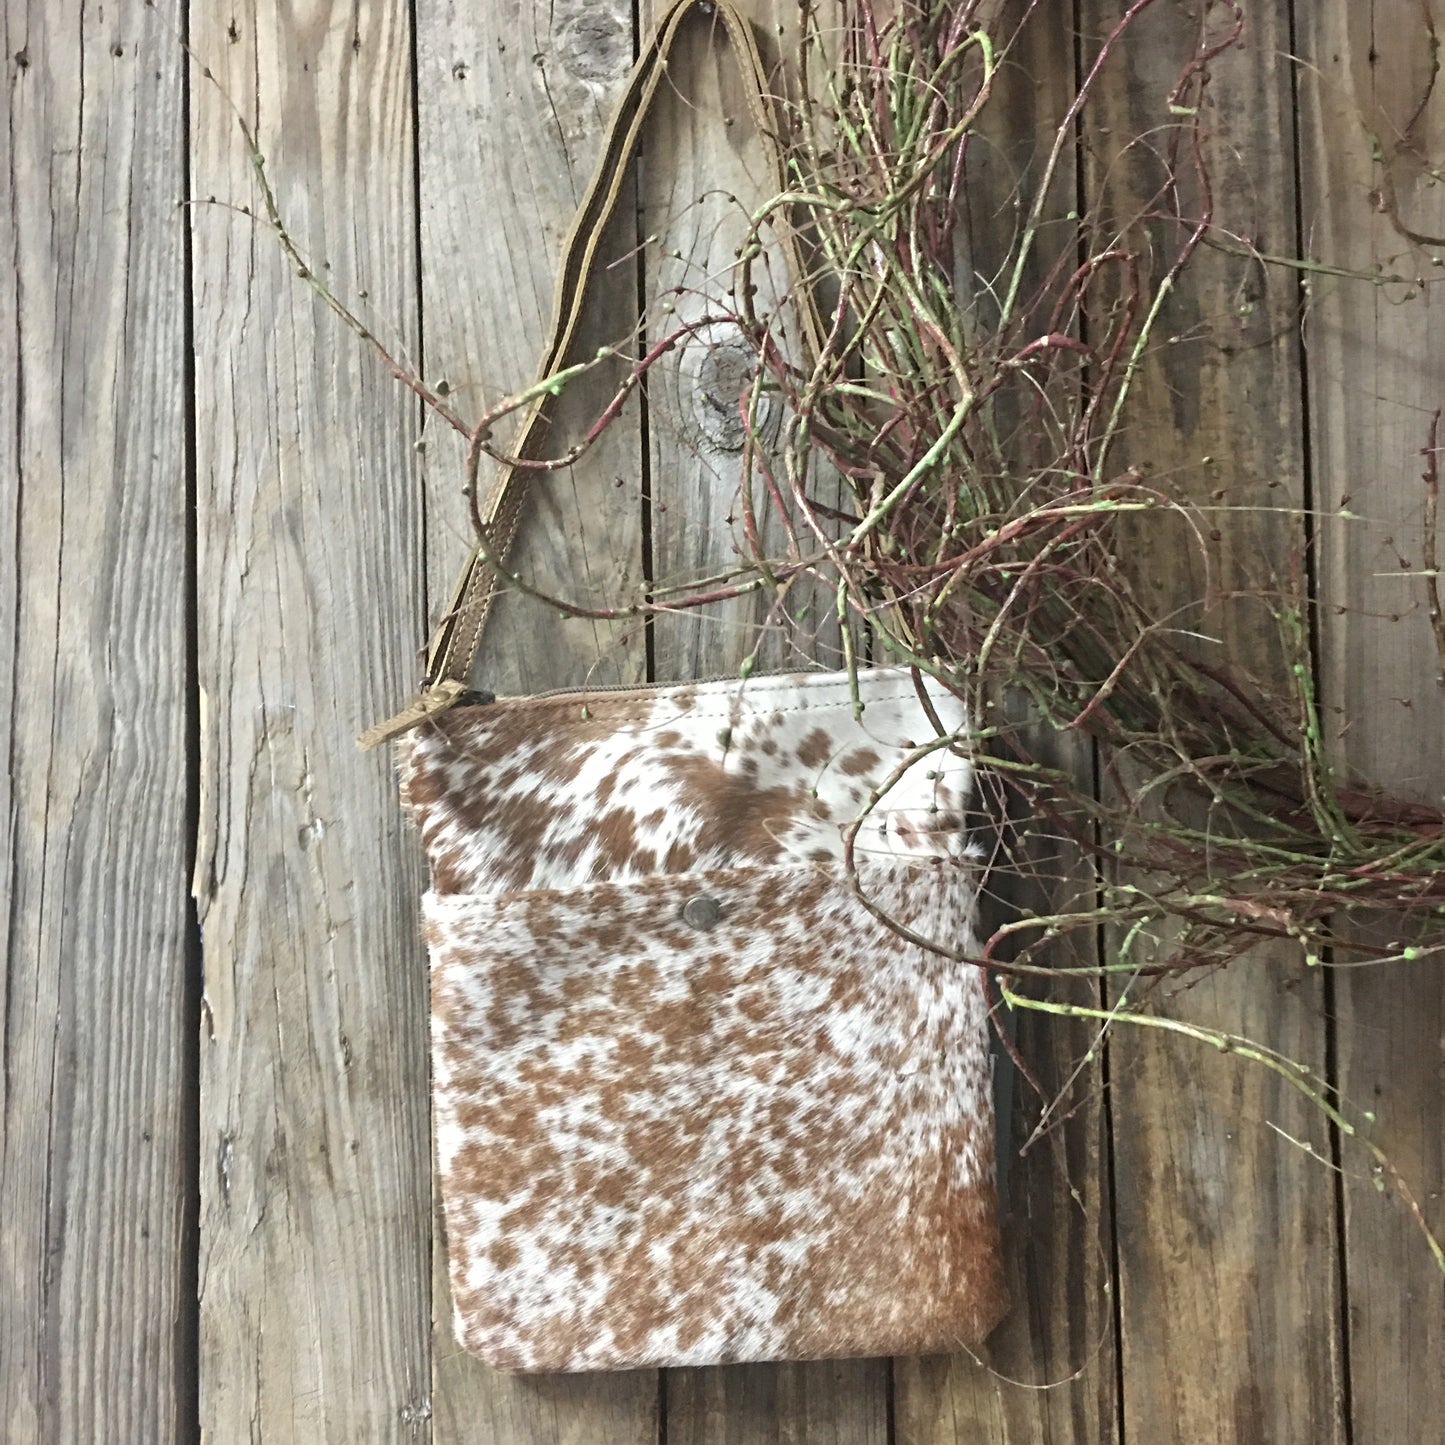 Crossbody leather purse, cowhide hairon leather purse